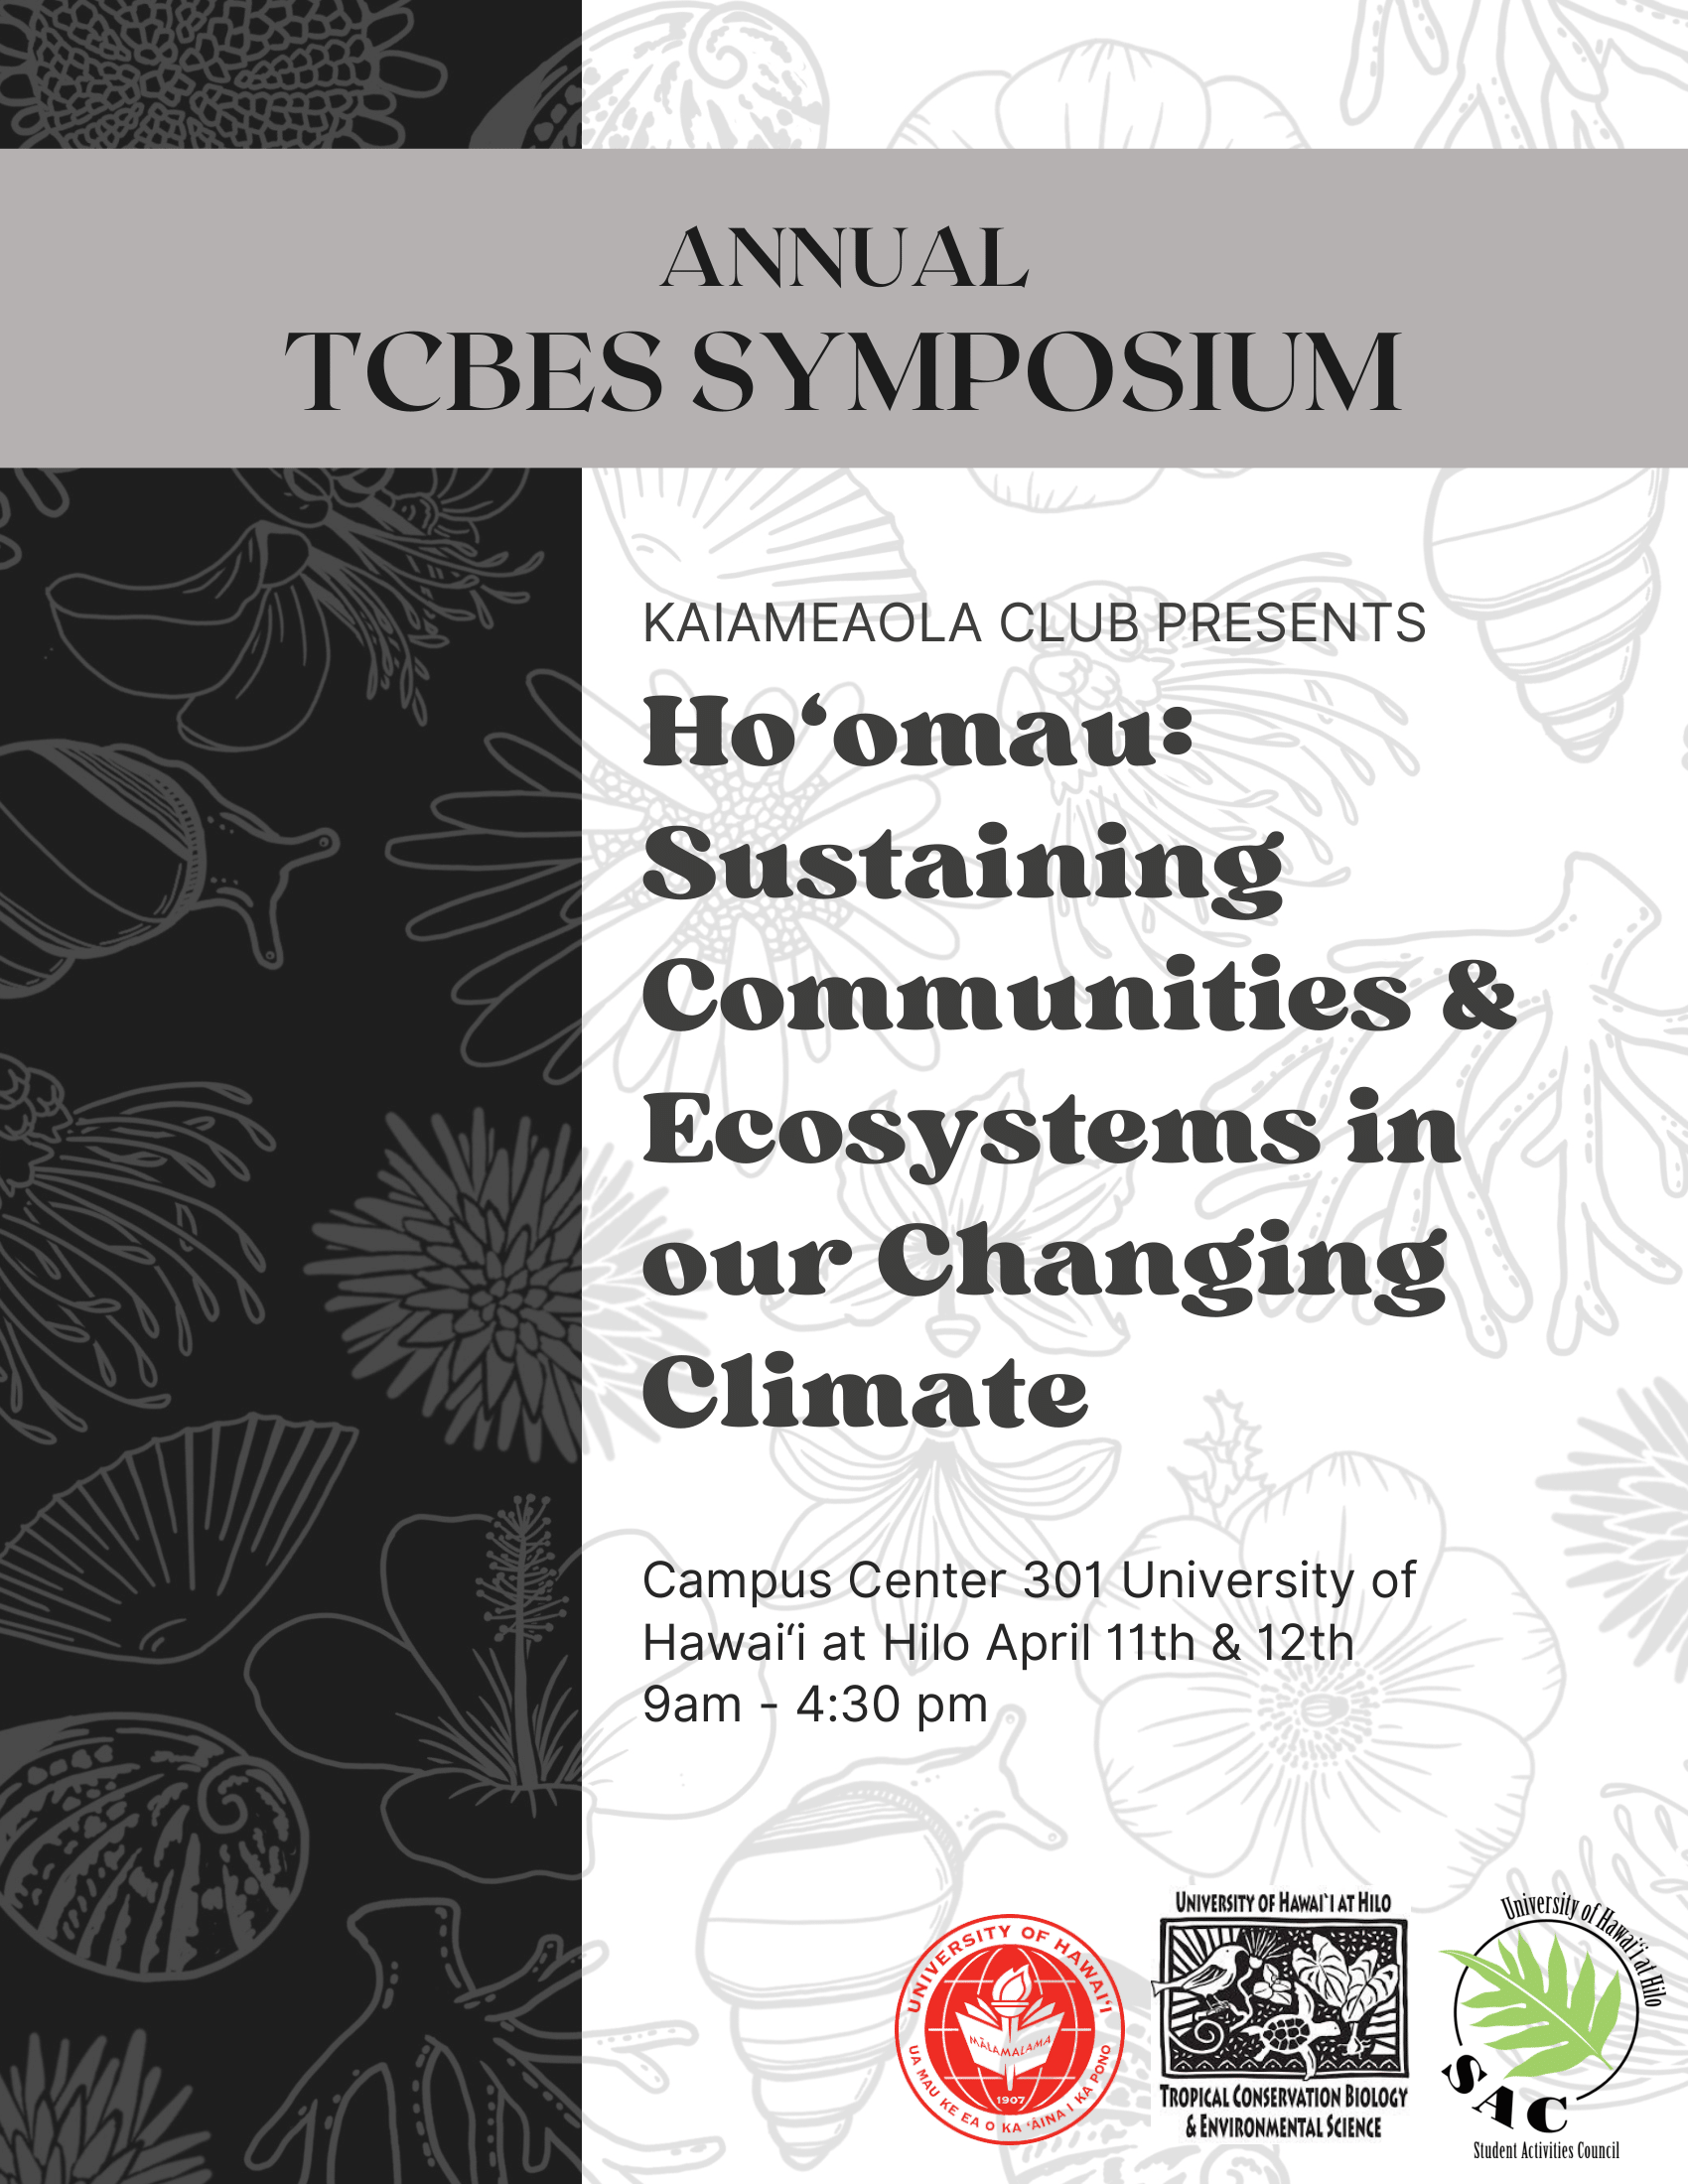 Annual TCBES Symposium Kaiameaola Club presents "Ho'omau: Sustaining Communities & Ecosystems in our Changing Climate" Where: Campus Center 301 University of Hawai'i at Hilo When: April 11th-12th 9am-4:30pm